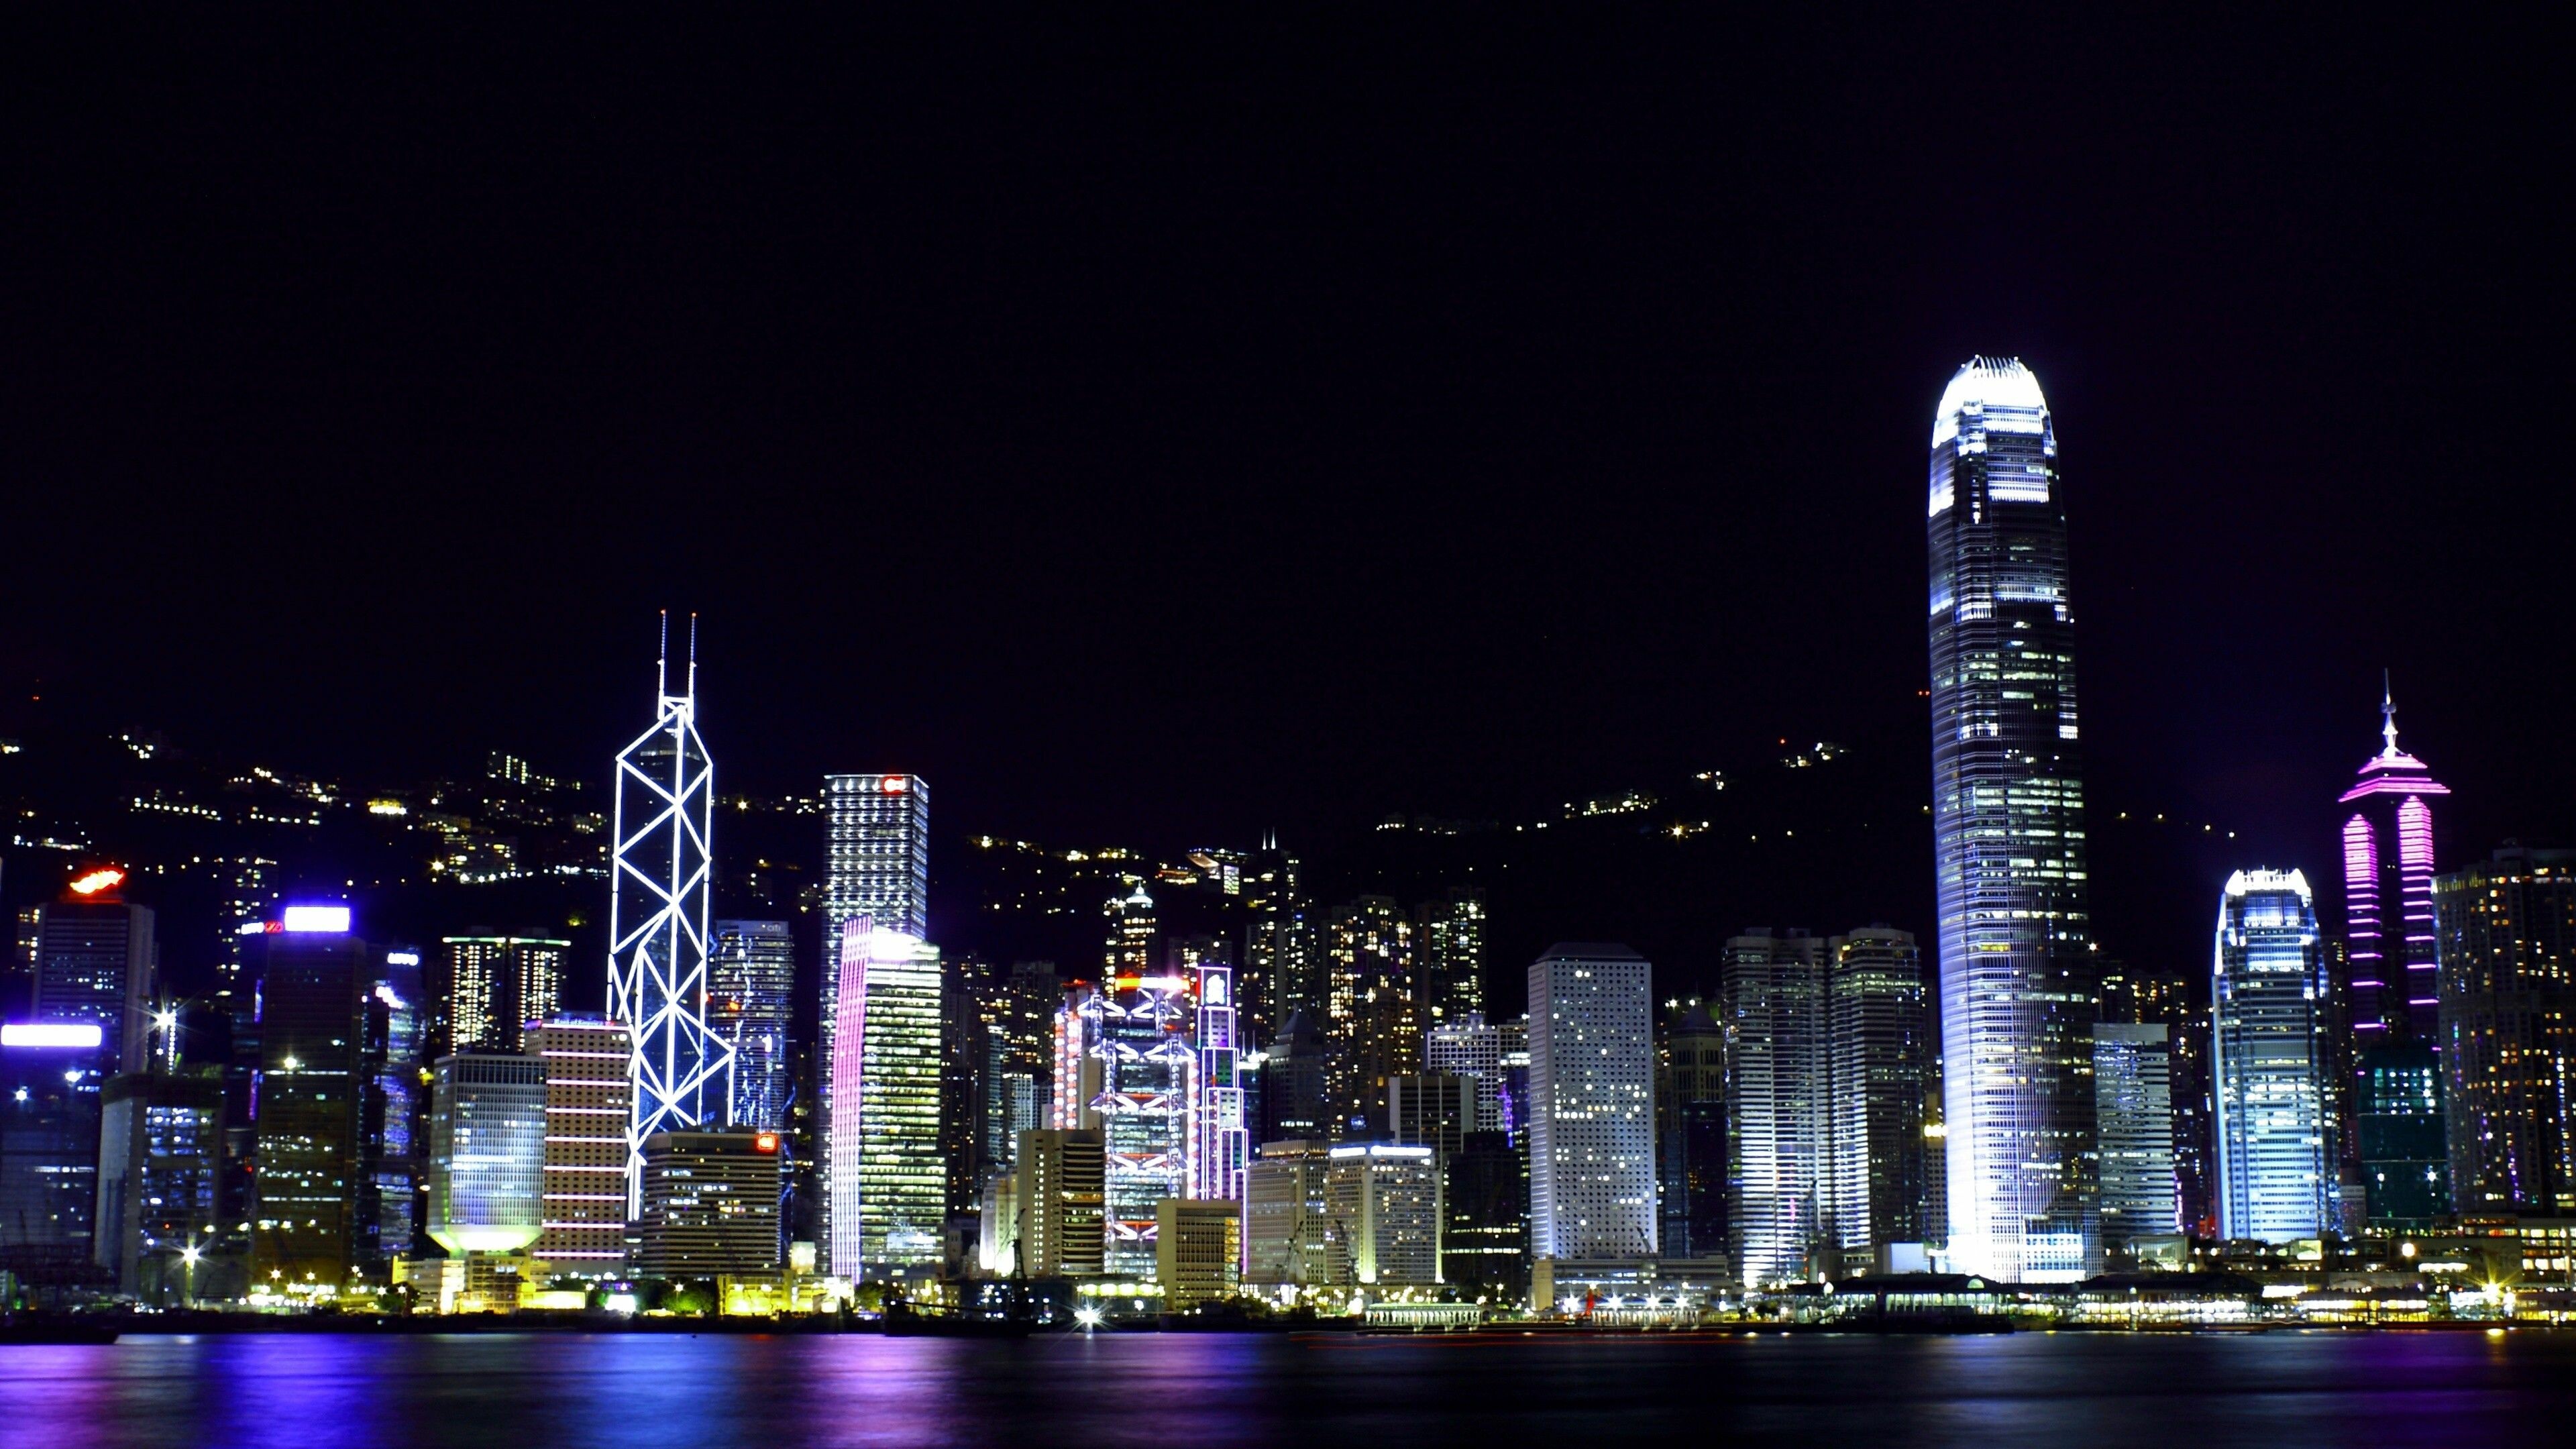 Hong Kong: Victoria Harbour, Known for its panoramic night view and skyline. 3840x2160 4K Background.